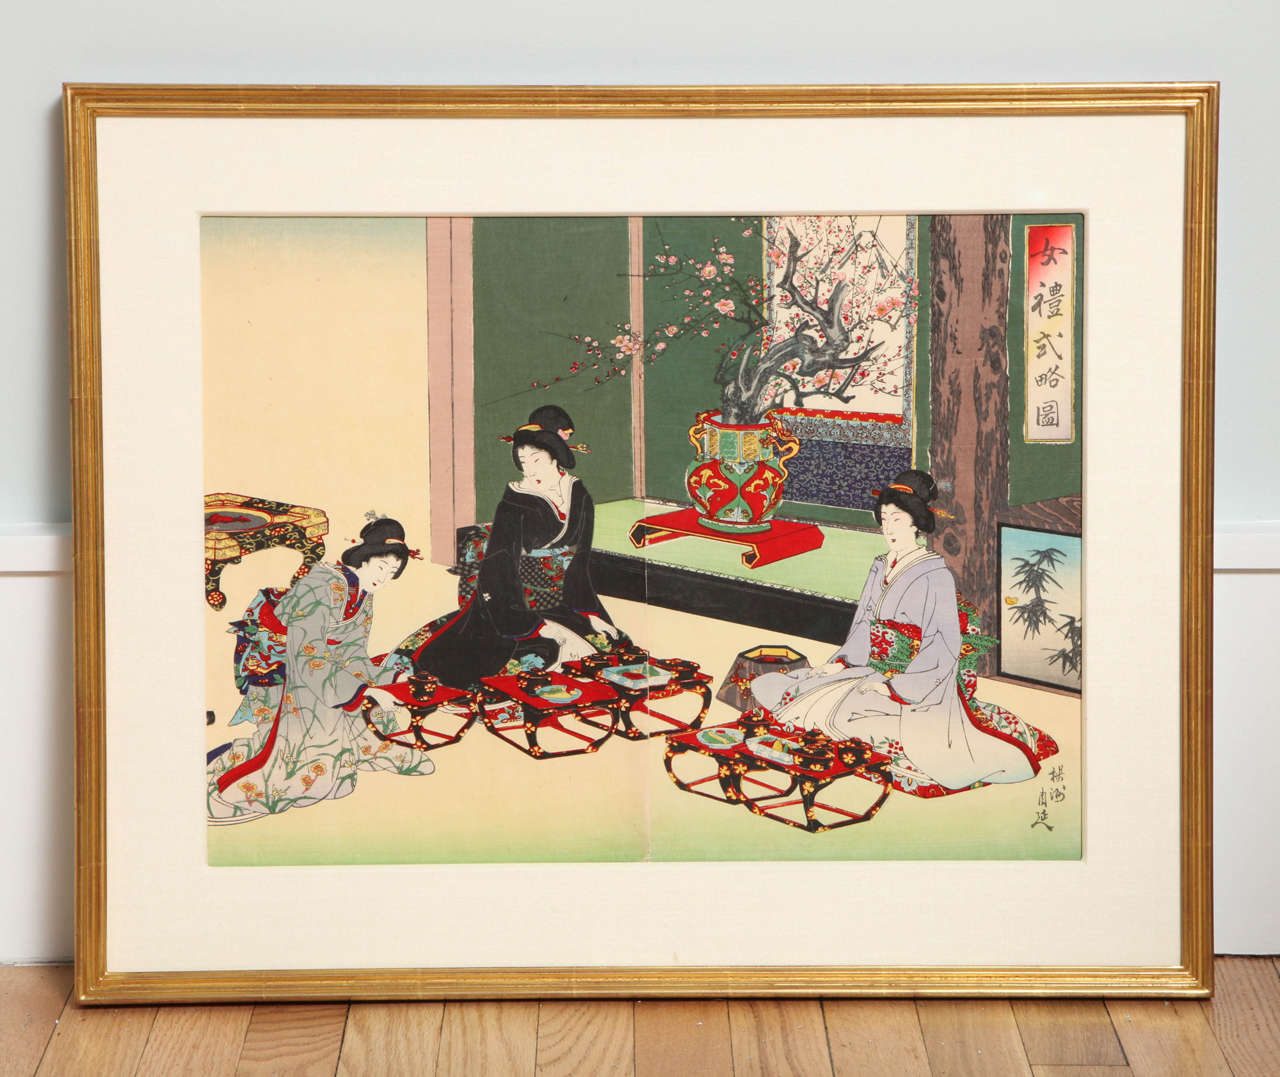 This Meiji-period color woodblock by Toyohara Chikanobu (1838-1912) depicts three elegant female courtiers in traditional dress taking refreshments. This diptych, from the issued triptych, has been mounted in a silk-wrapped mat fitted in a giltwood